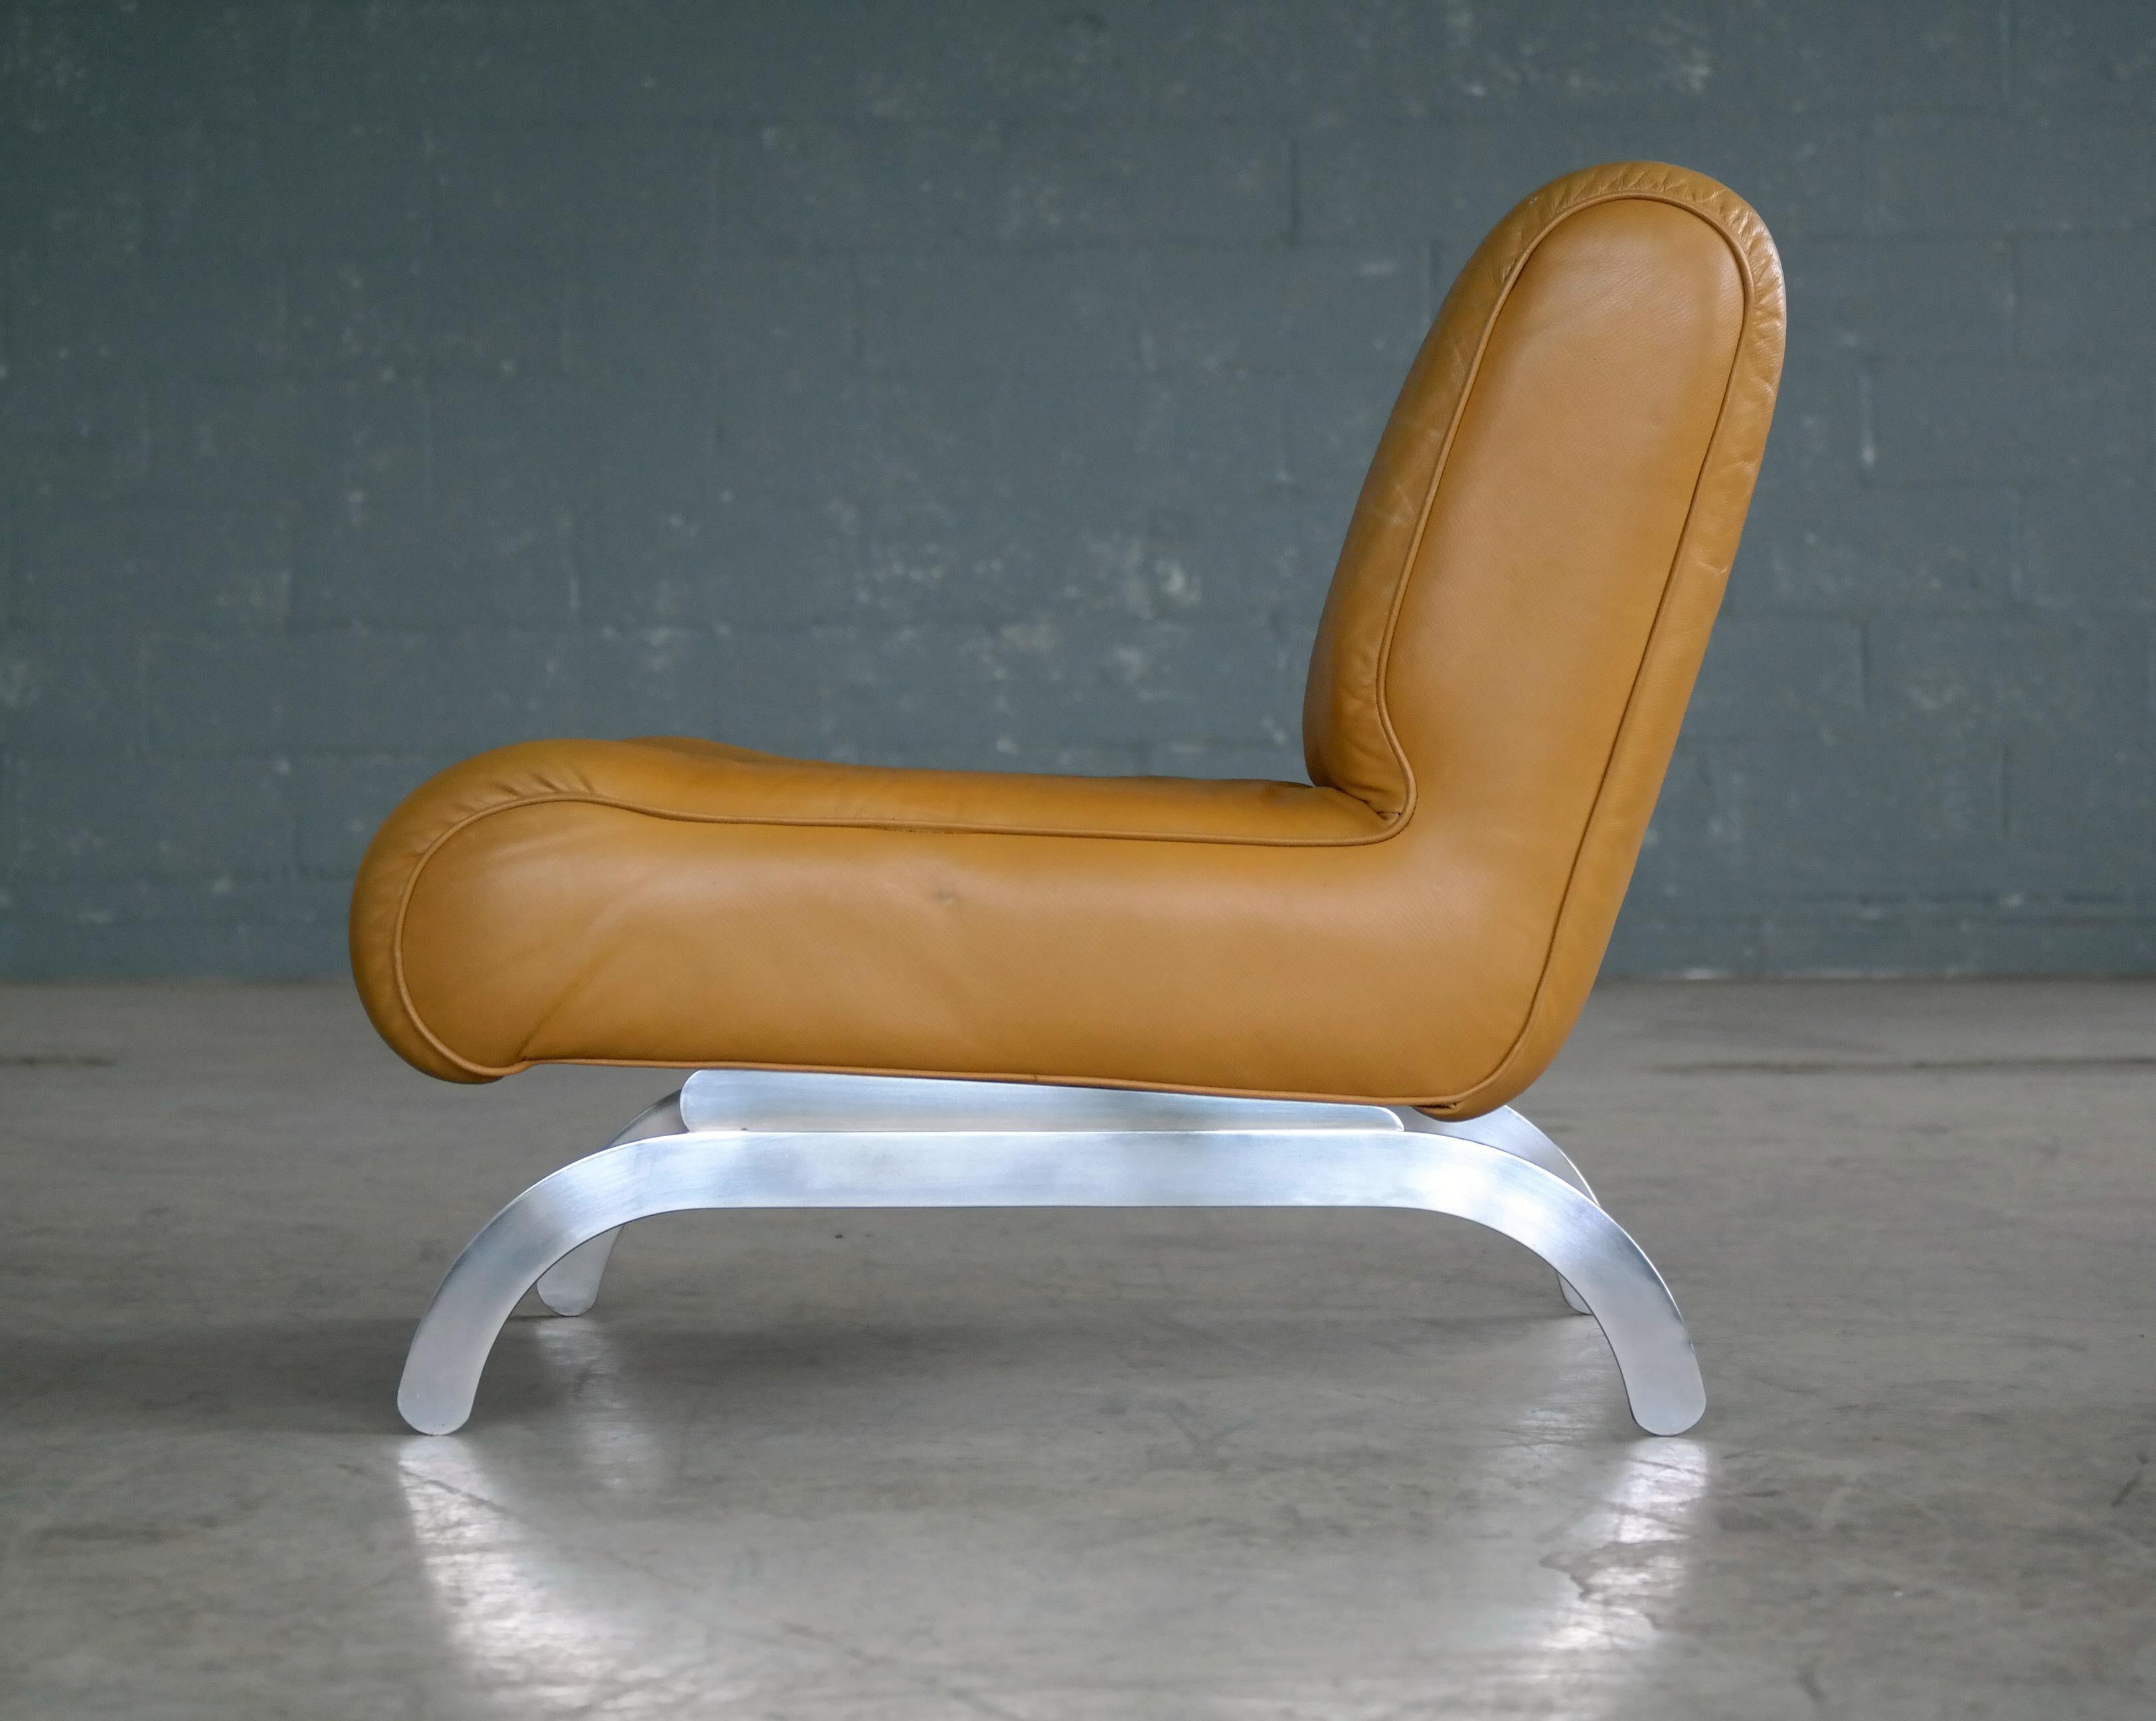 Mid-20th Century Midcentury Independence Lounge Chair in Mustard Yellow Leather by Karl Wittmann